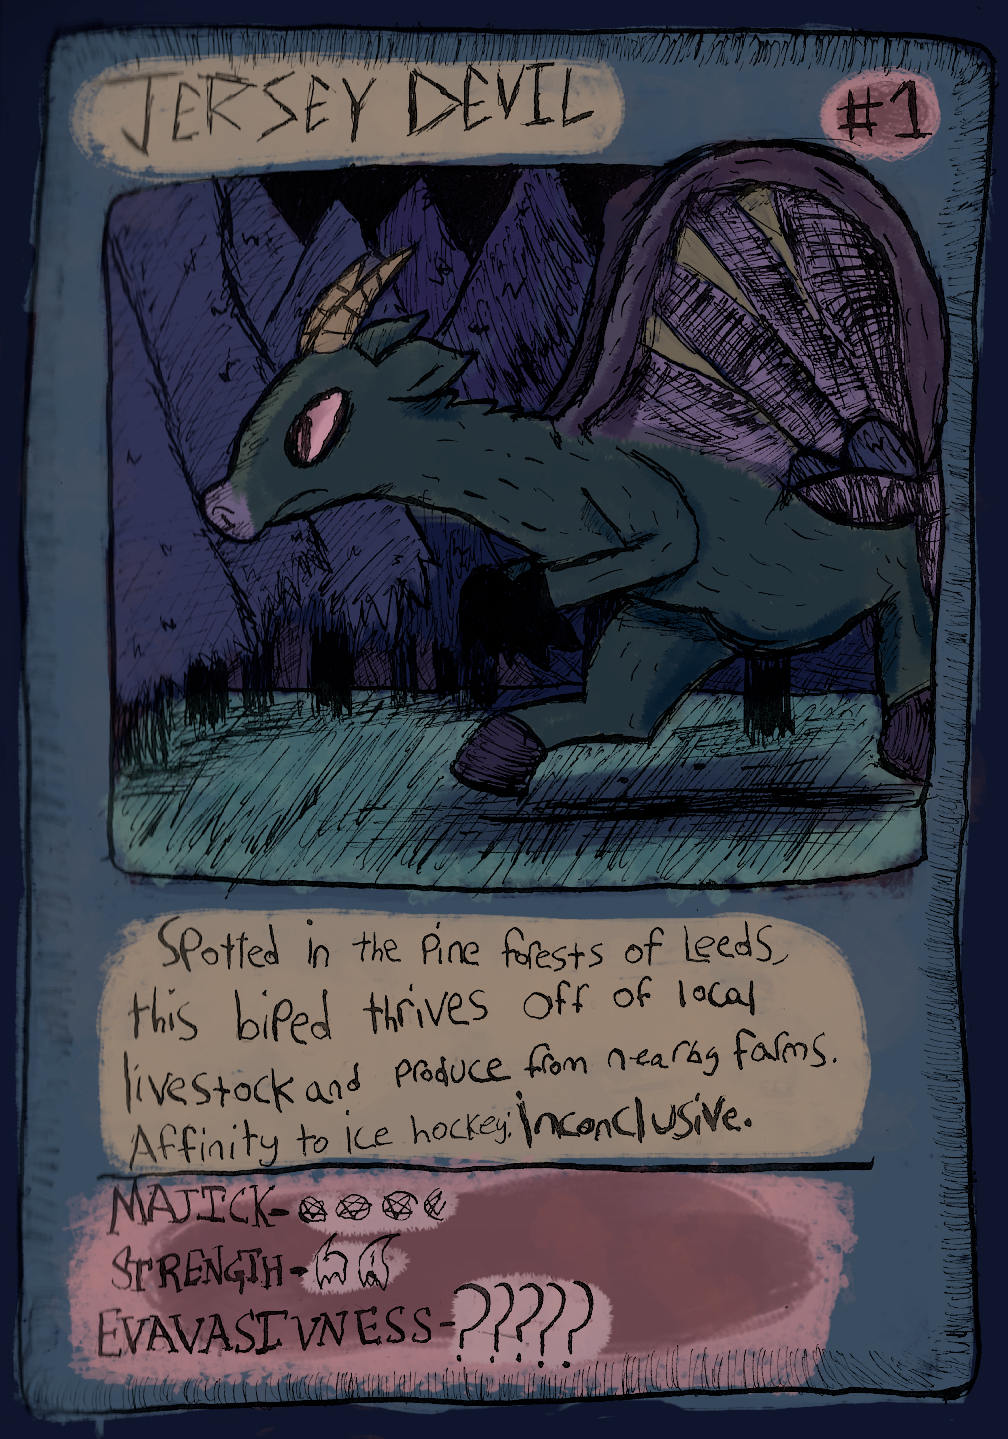 Collect-A-Cryptid #1: Jersey Devil